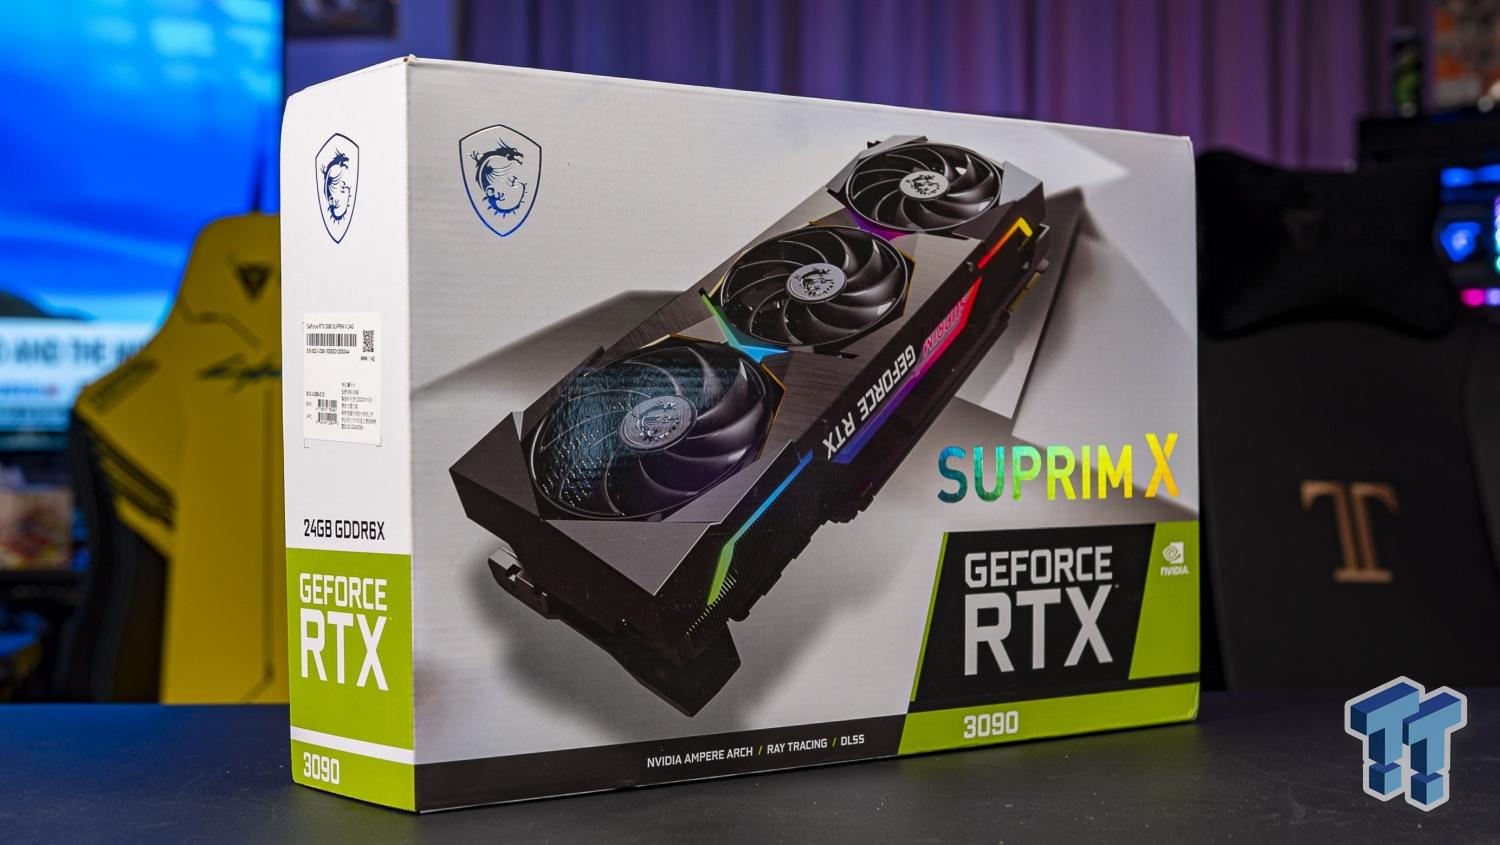 NVIDIA GeForce RTX 3090 Flagship Ampere Gaming Graphics Card Pictured In  All Its Glory